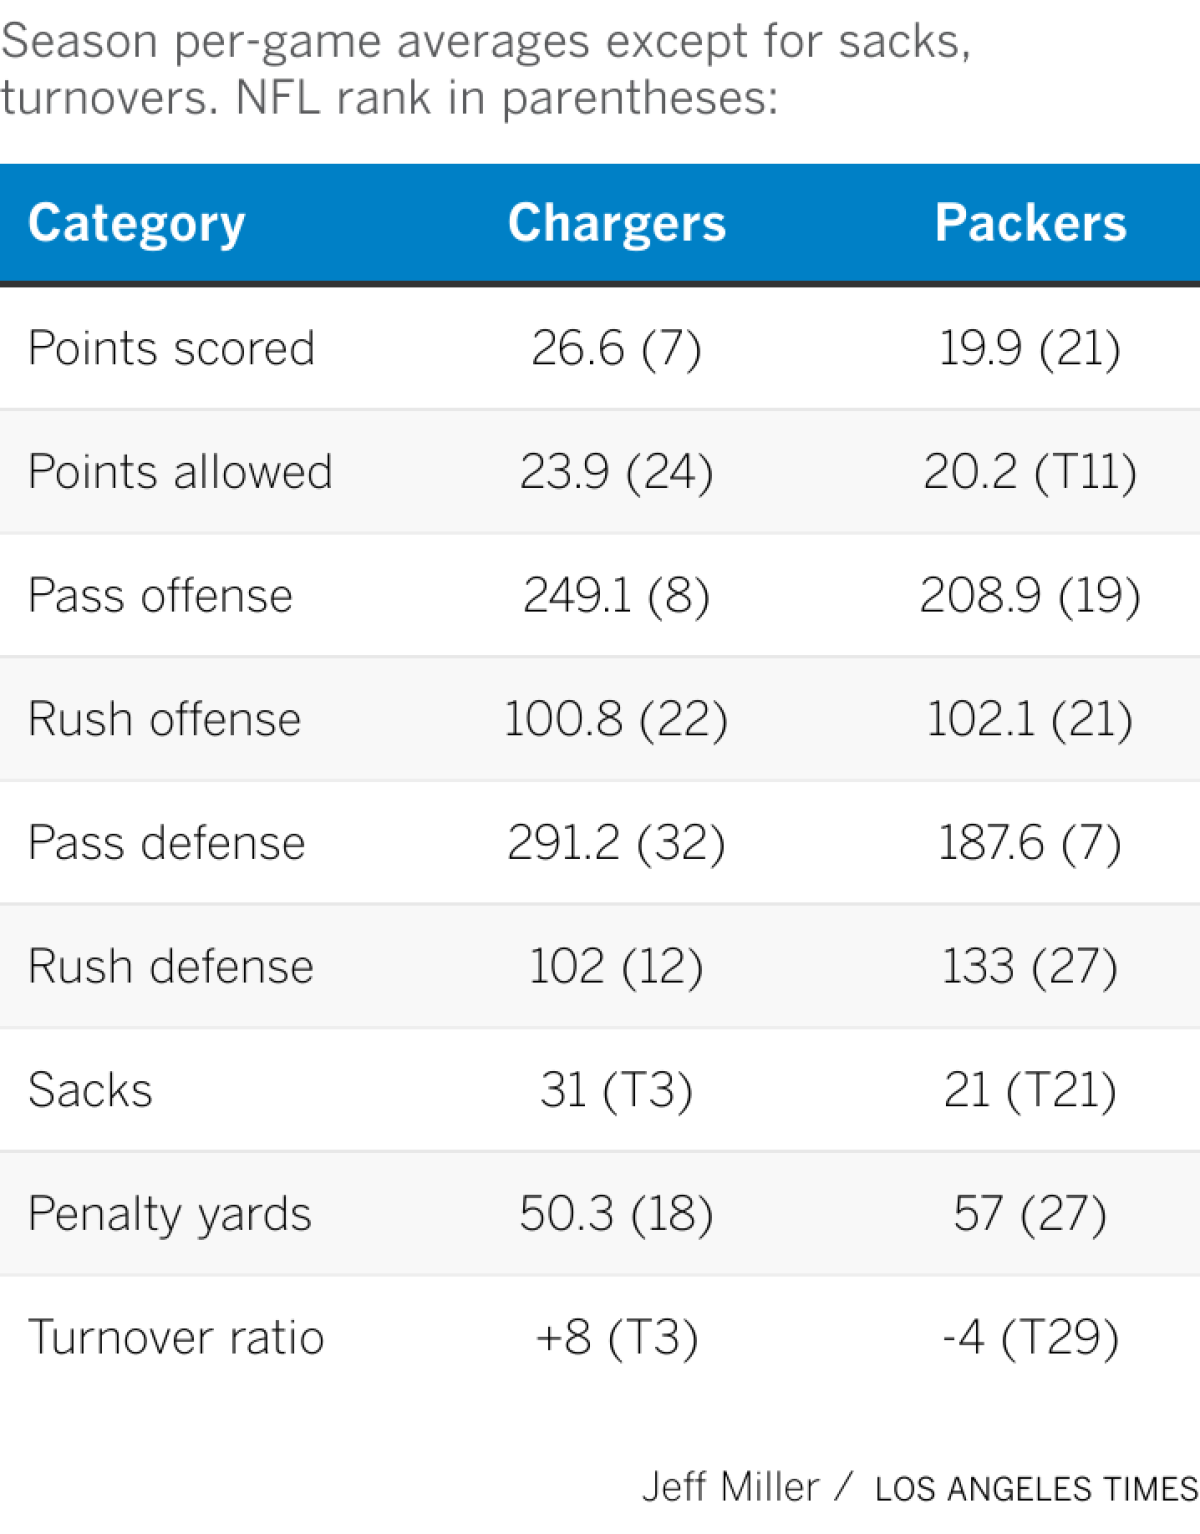 A chart comparing season stats for the Chargers and Packers.